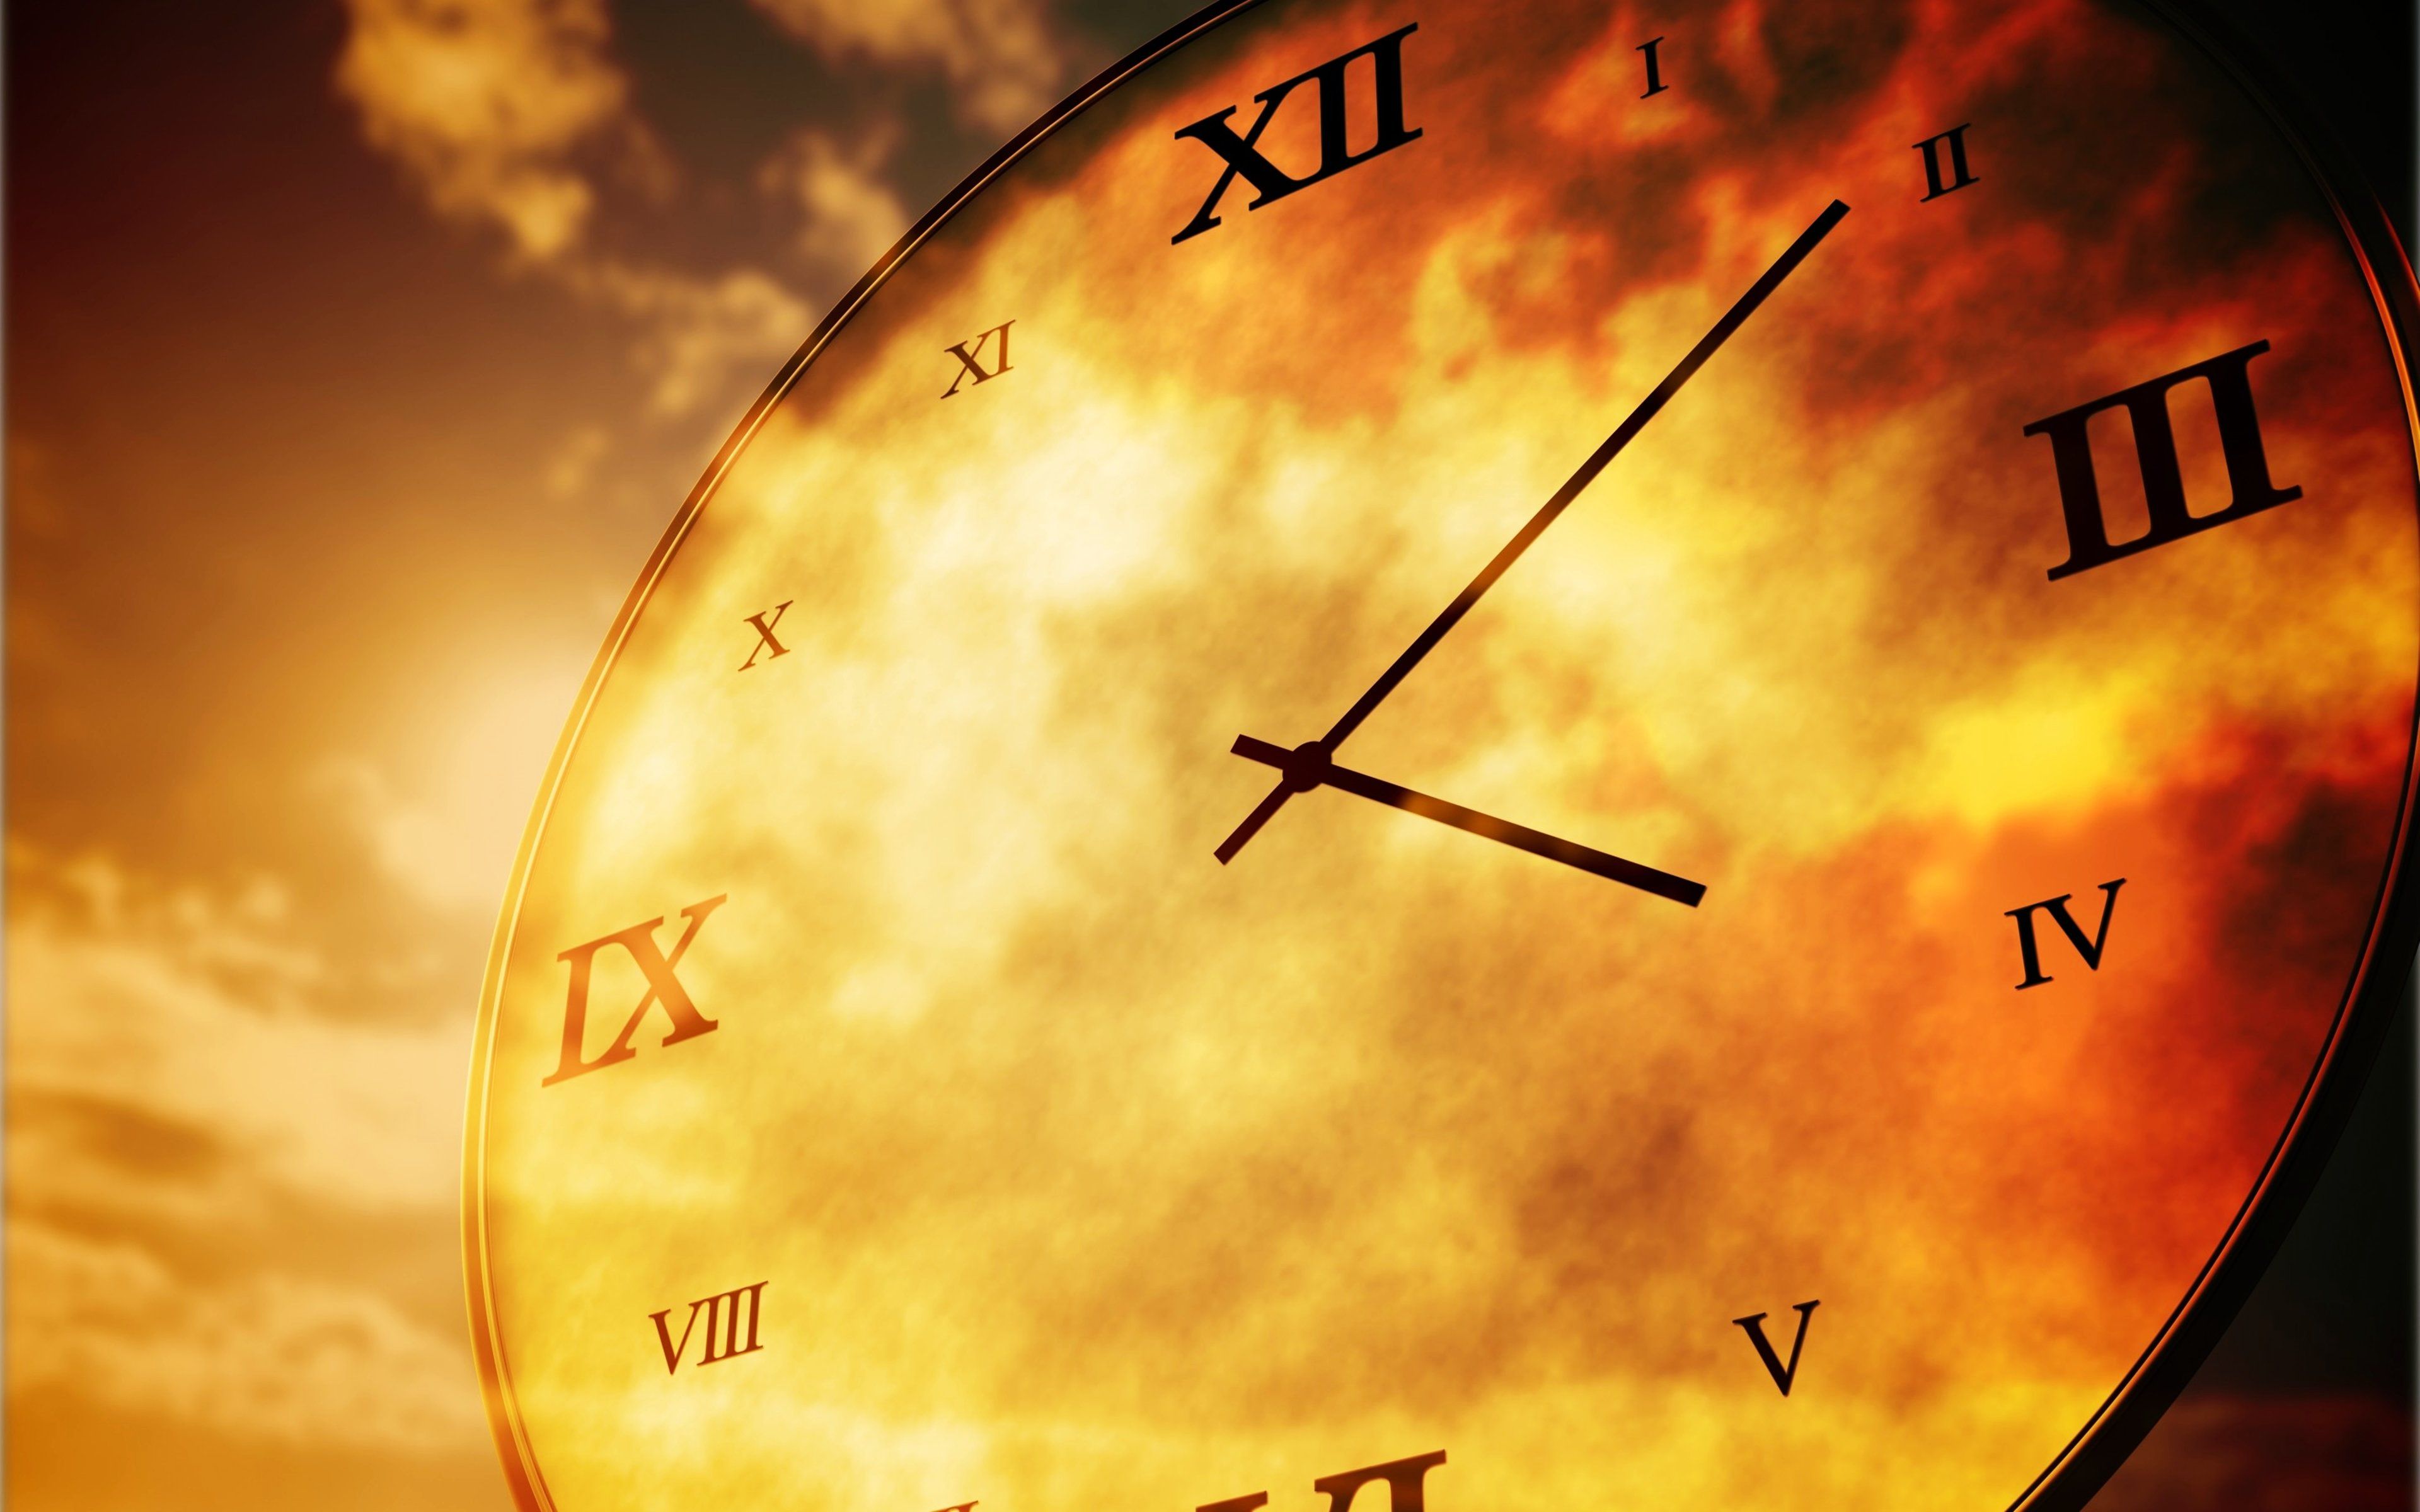 Clock time clouds sky years days mood life wallpaper 3840x2400